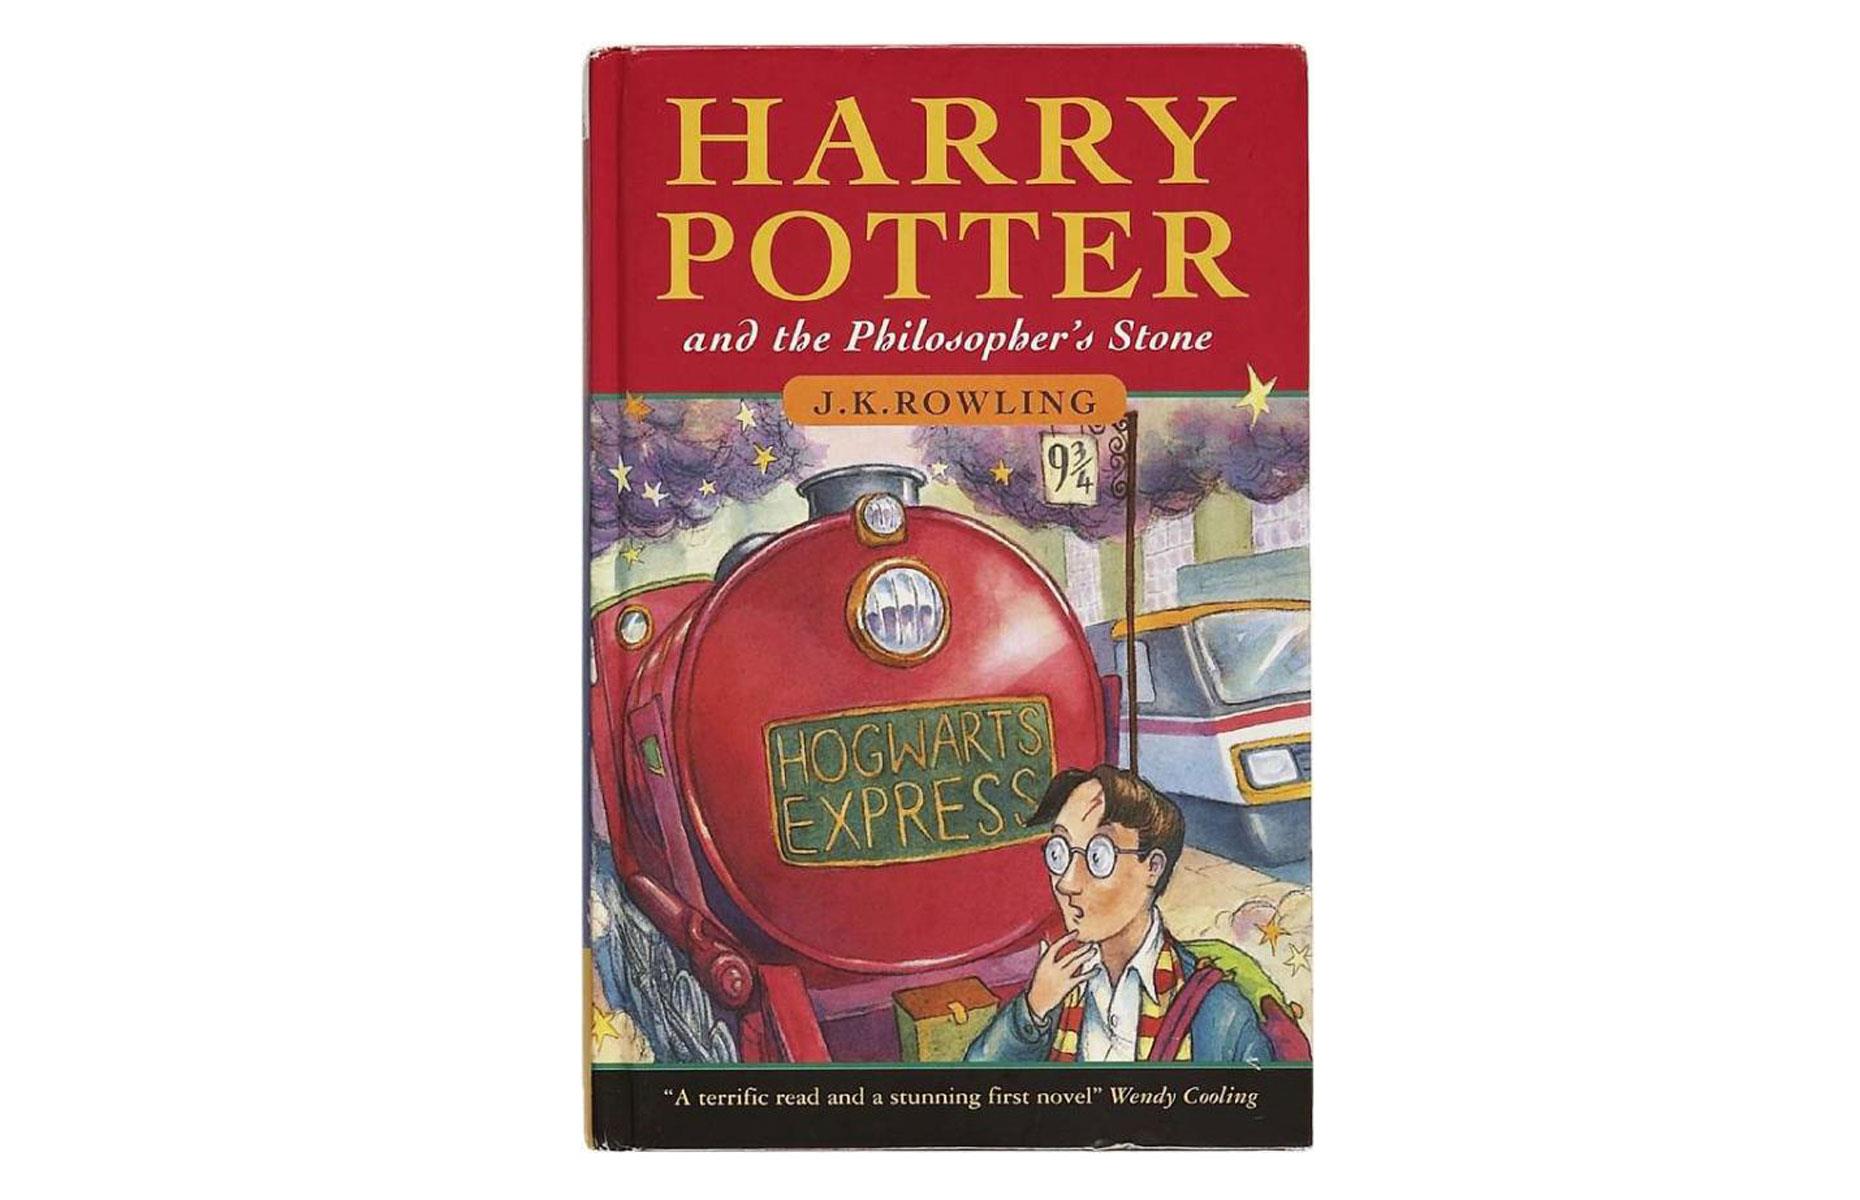 Harry Potter and the Philosopher’s Stone by JK Rowling first edition copy: up to $158,315 (£118,812)